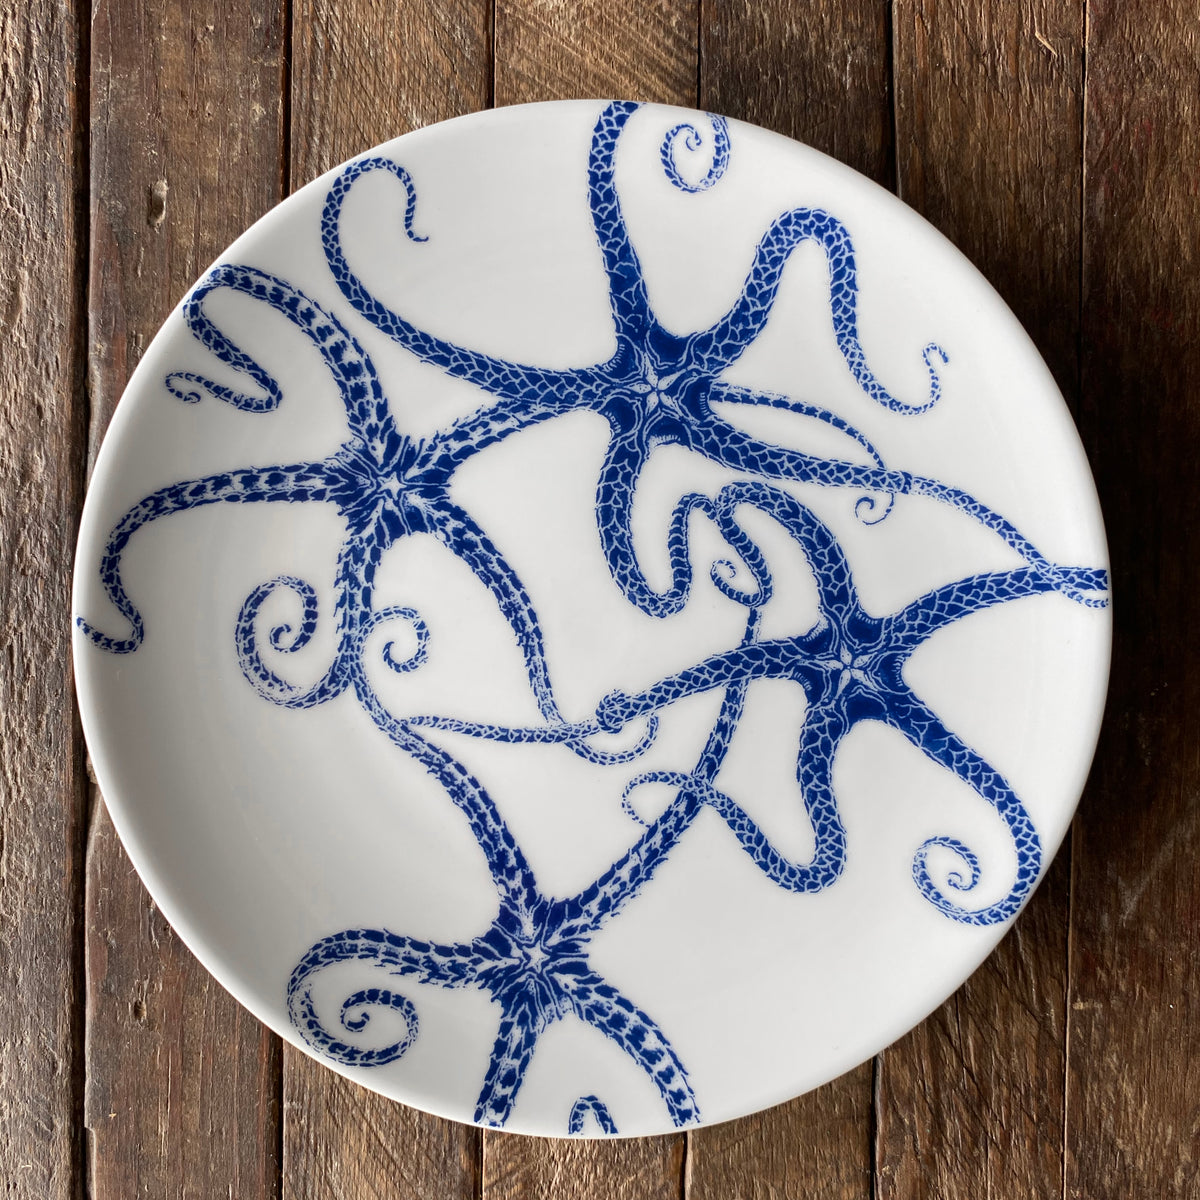 White lead-free porcelain plate with a blue octopus design, placed on a wooden surface. Part of our heirloom-quality dinnerware collection, this piece pairs beautifully with our Caskata Artisanal Home Starfish Small Plates for an ocean-inspired table setting.